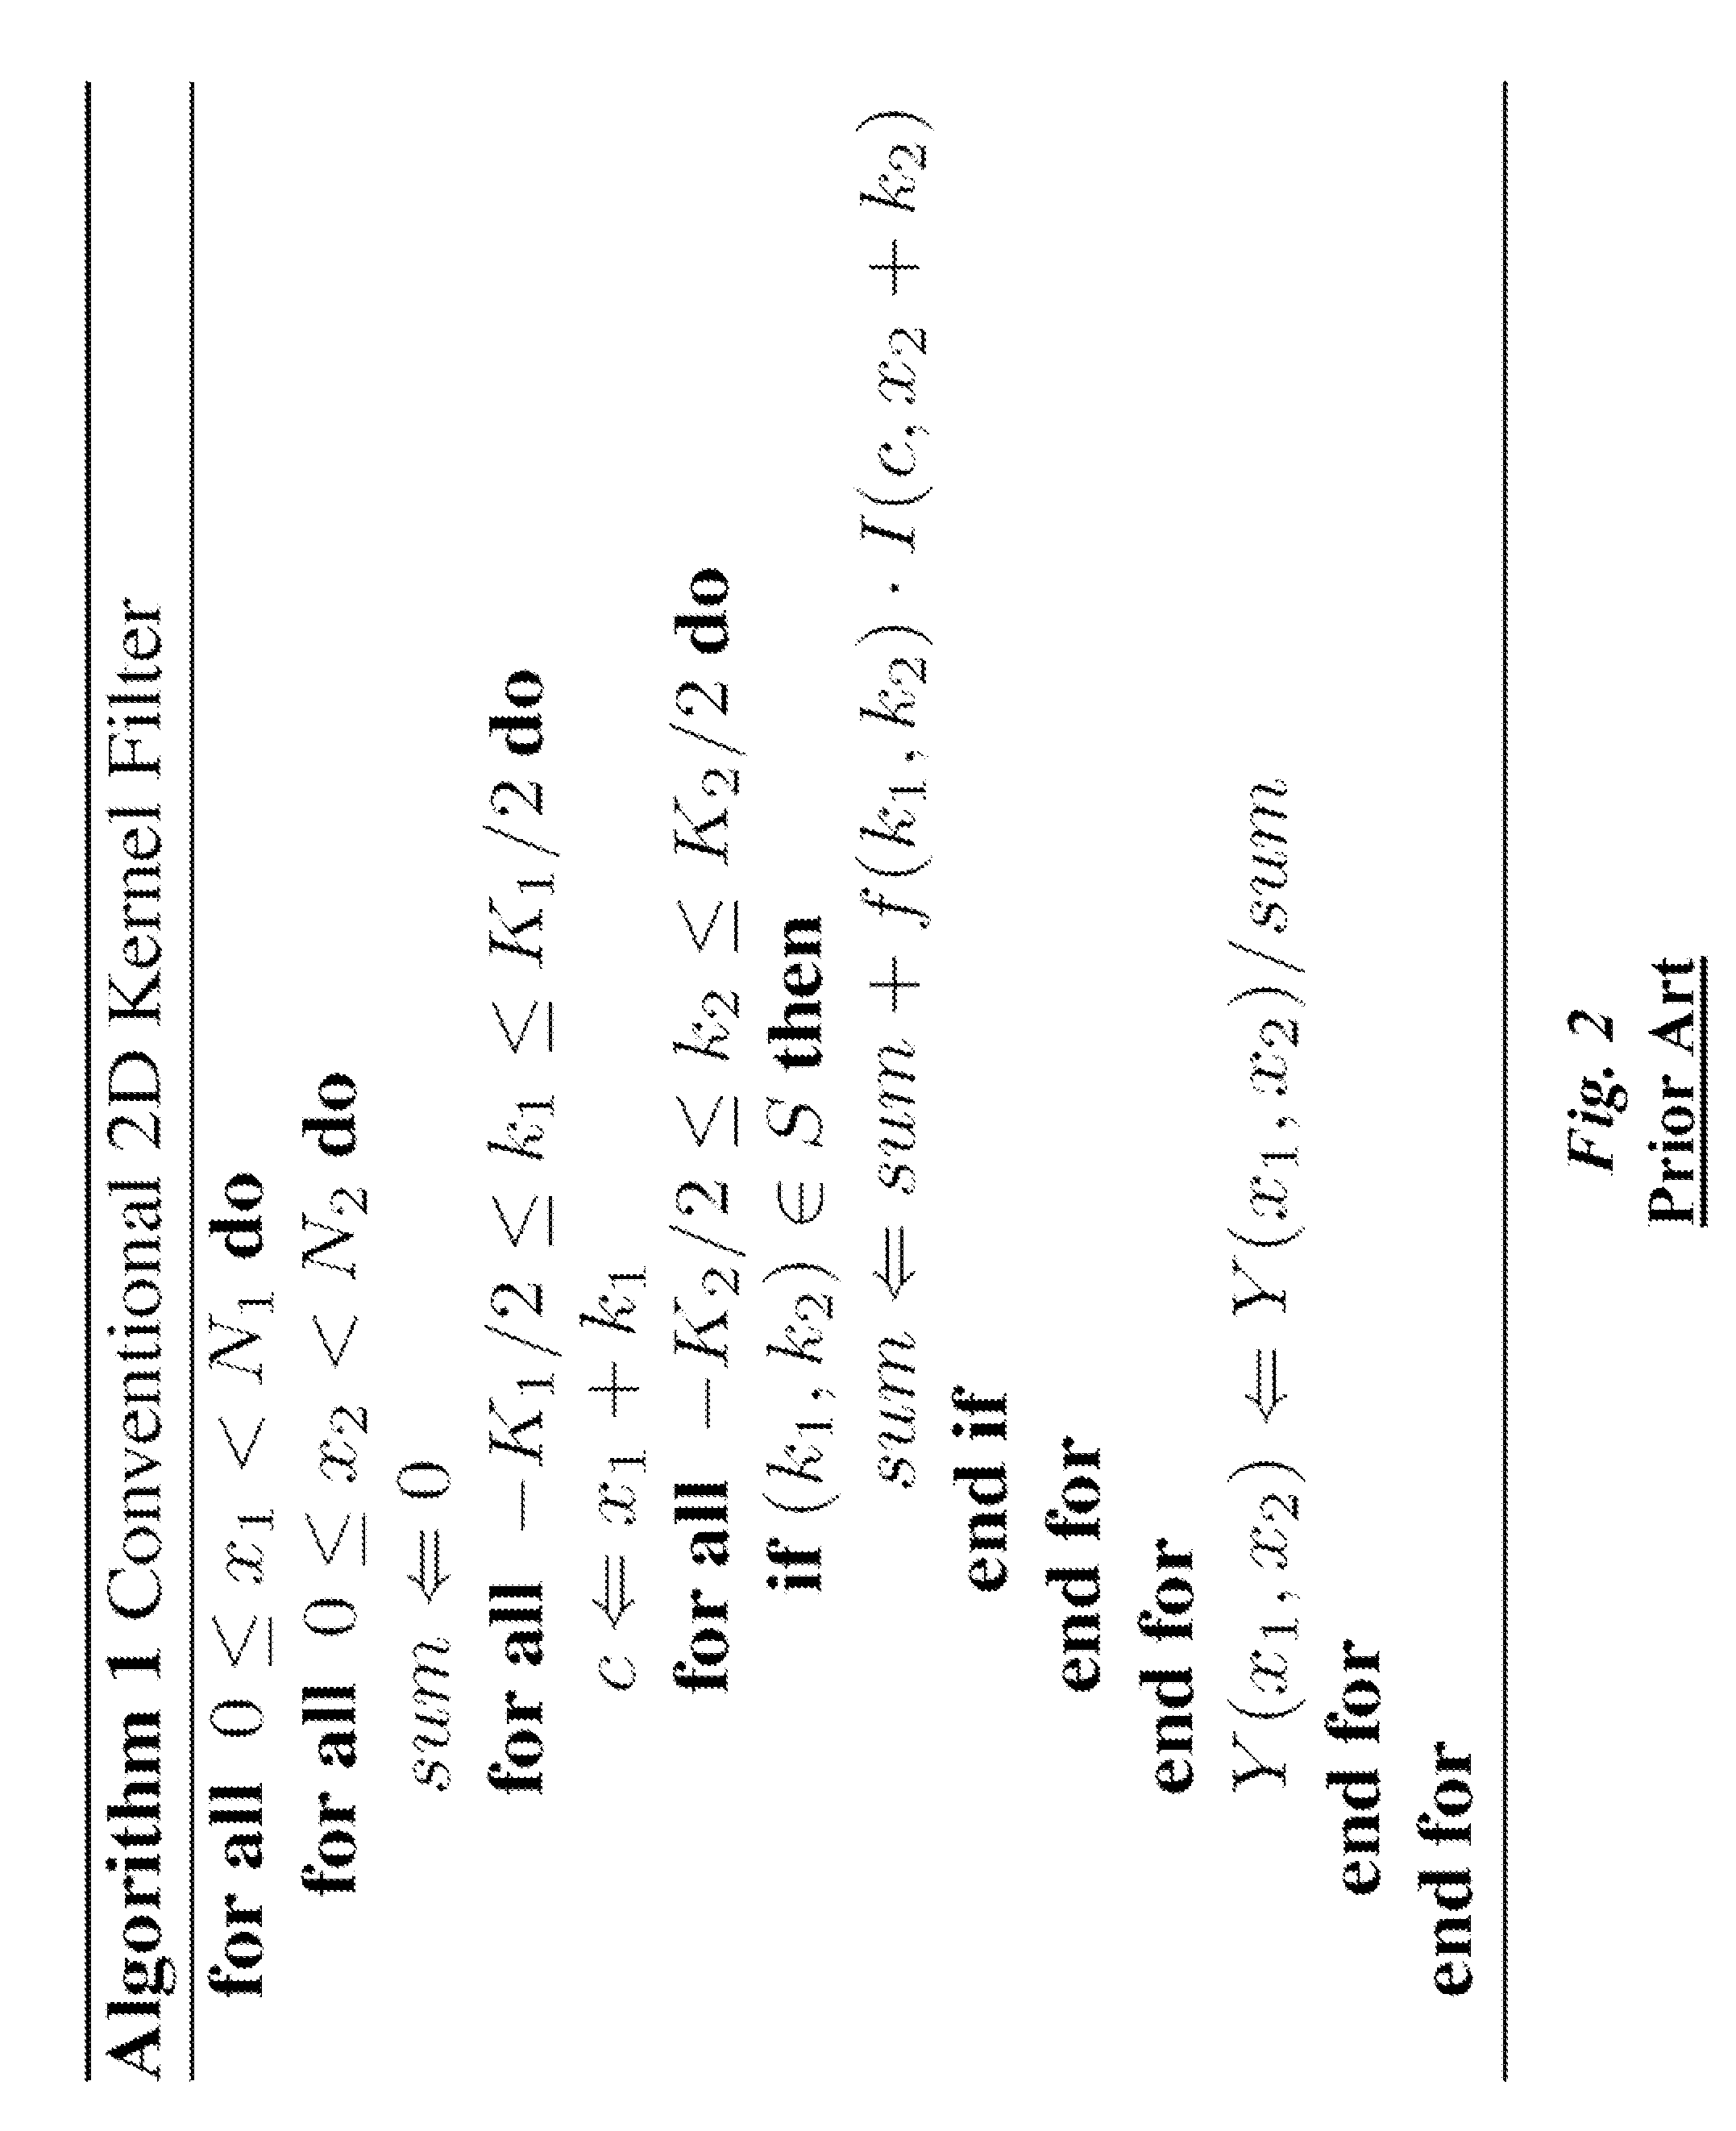 Method for filtering data with arbitrary kernel filters